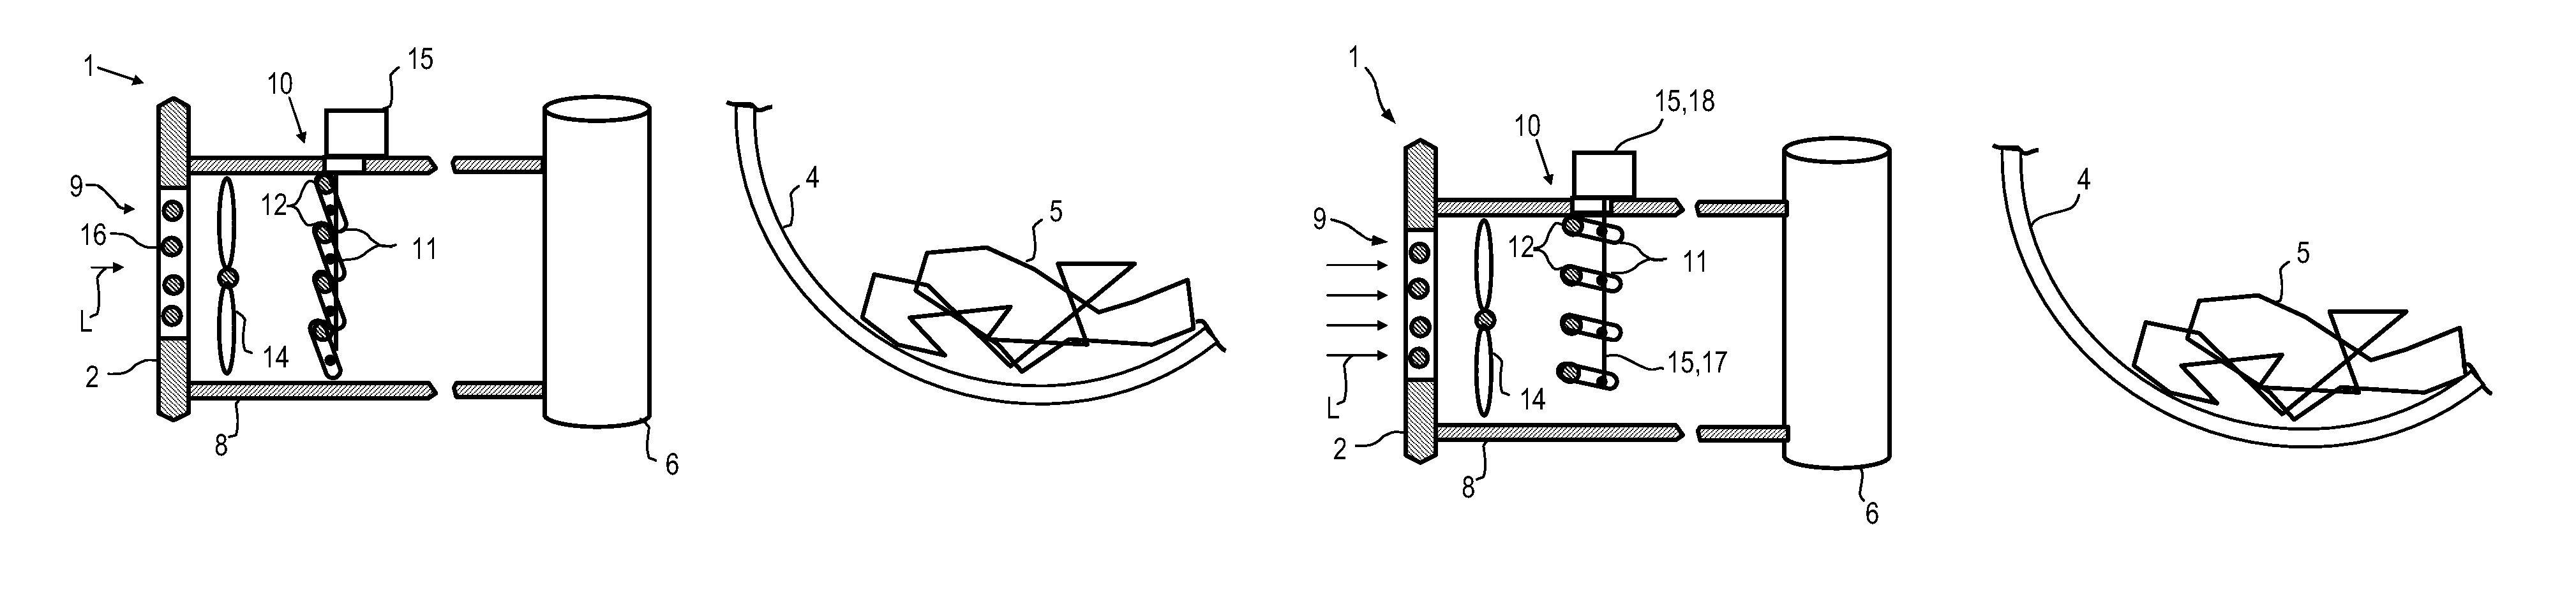 Domestic appliance with an open air duct